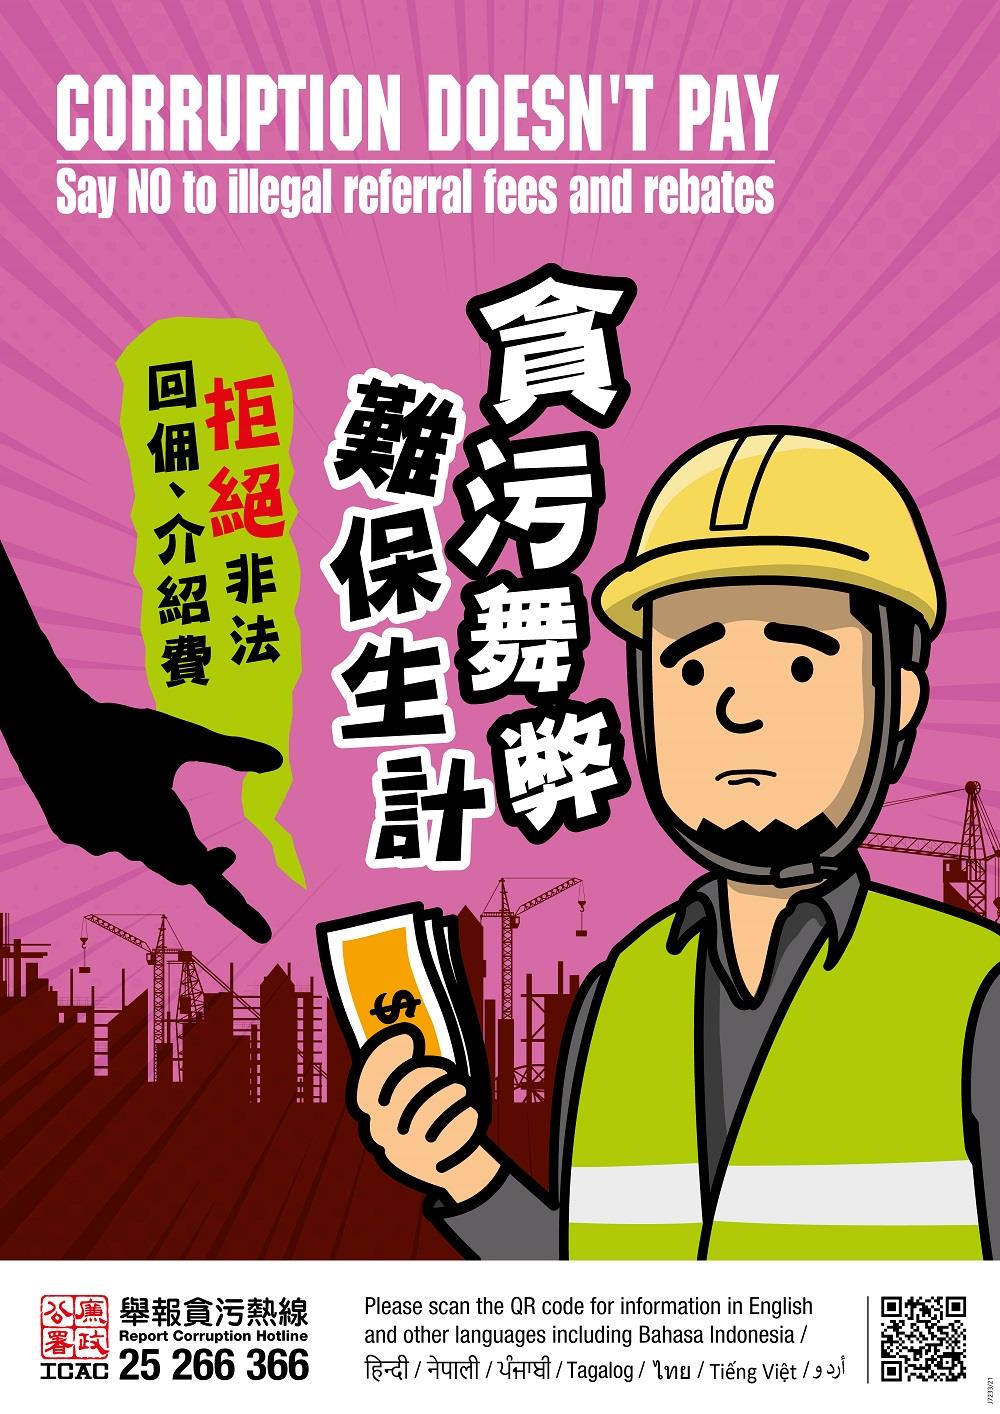 "Corruption Doesn't Pay - Say NO to Illegal referral fees and rebates" Construction Poster